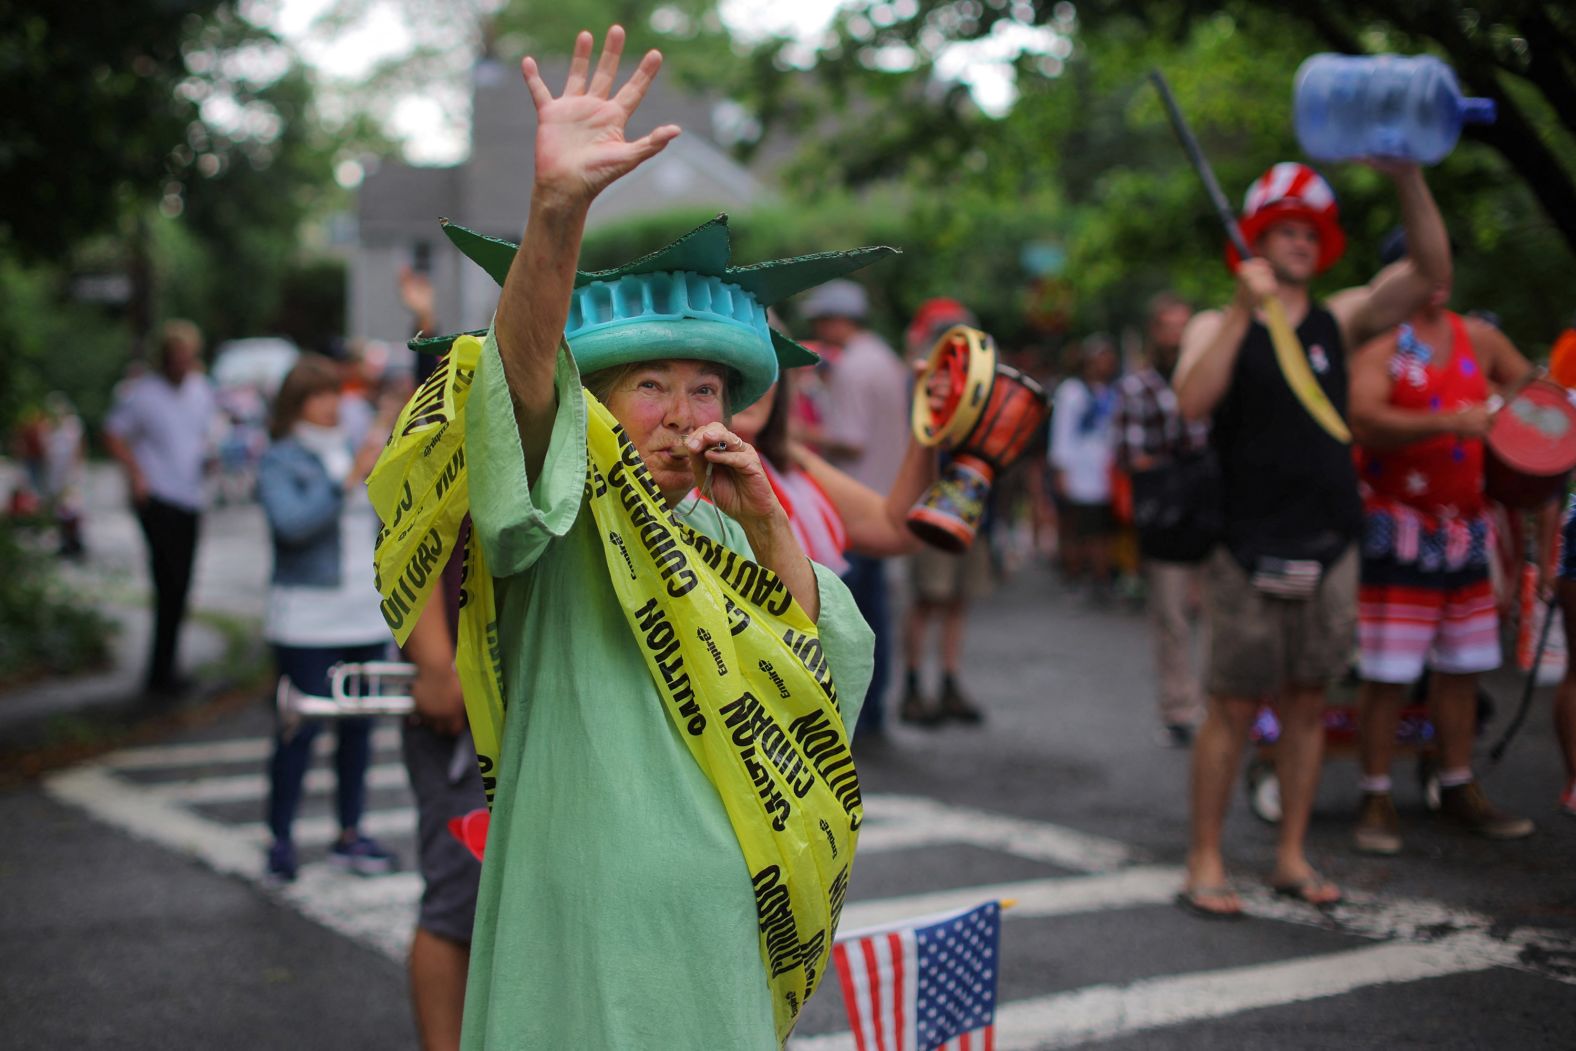 Local residents, including a woman dressed as the Statue of Liberty wrapped in caution tape, hold their own Fourth of July Parade in the Lanesville neighborhood of Gloucester, Massachusetts on Tuesday.